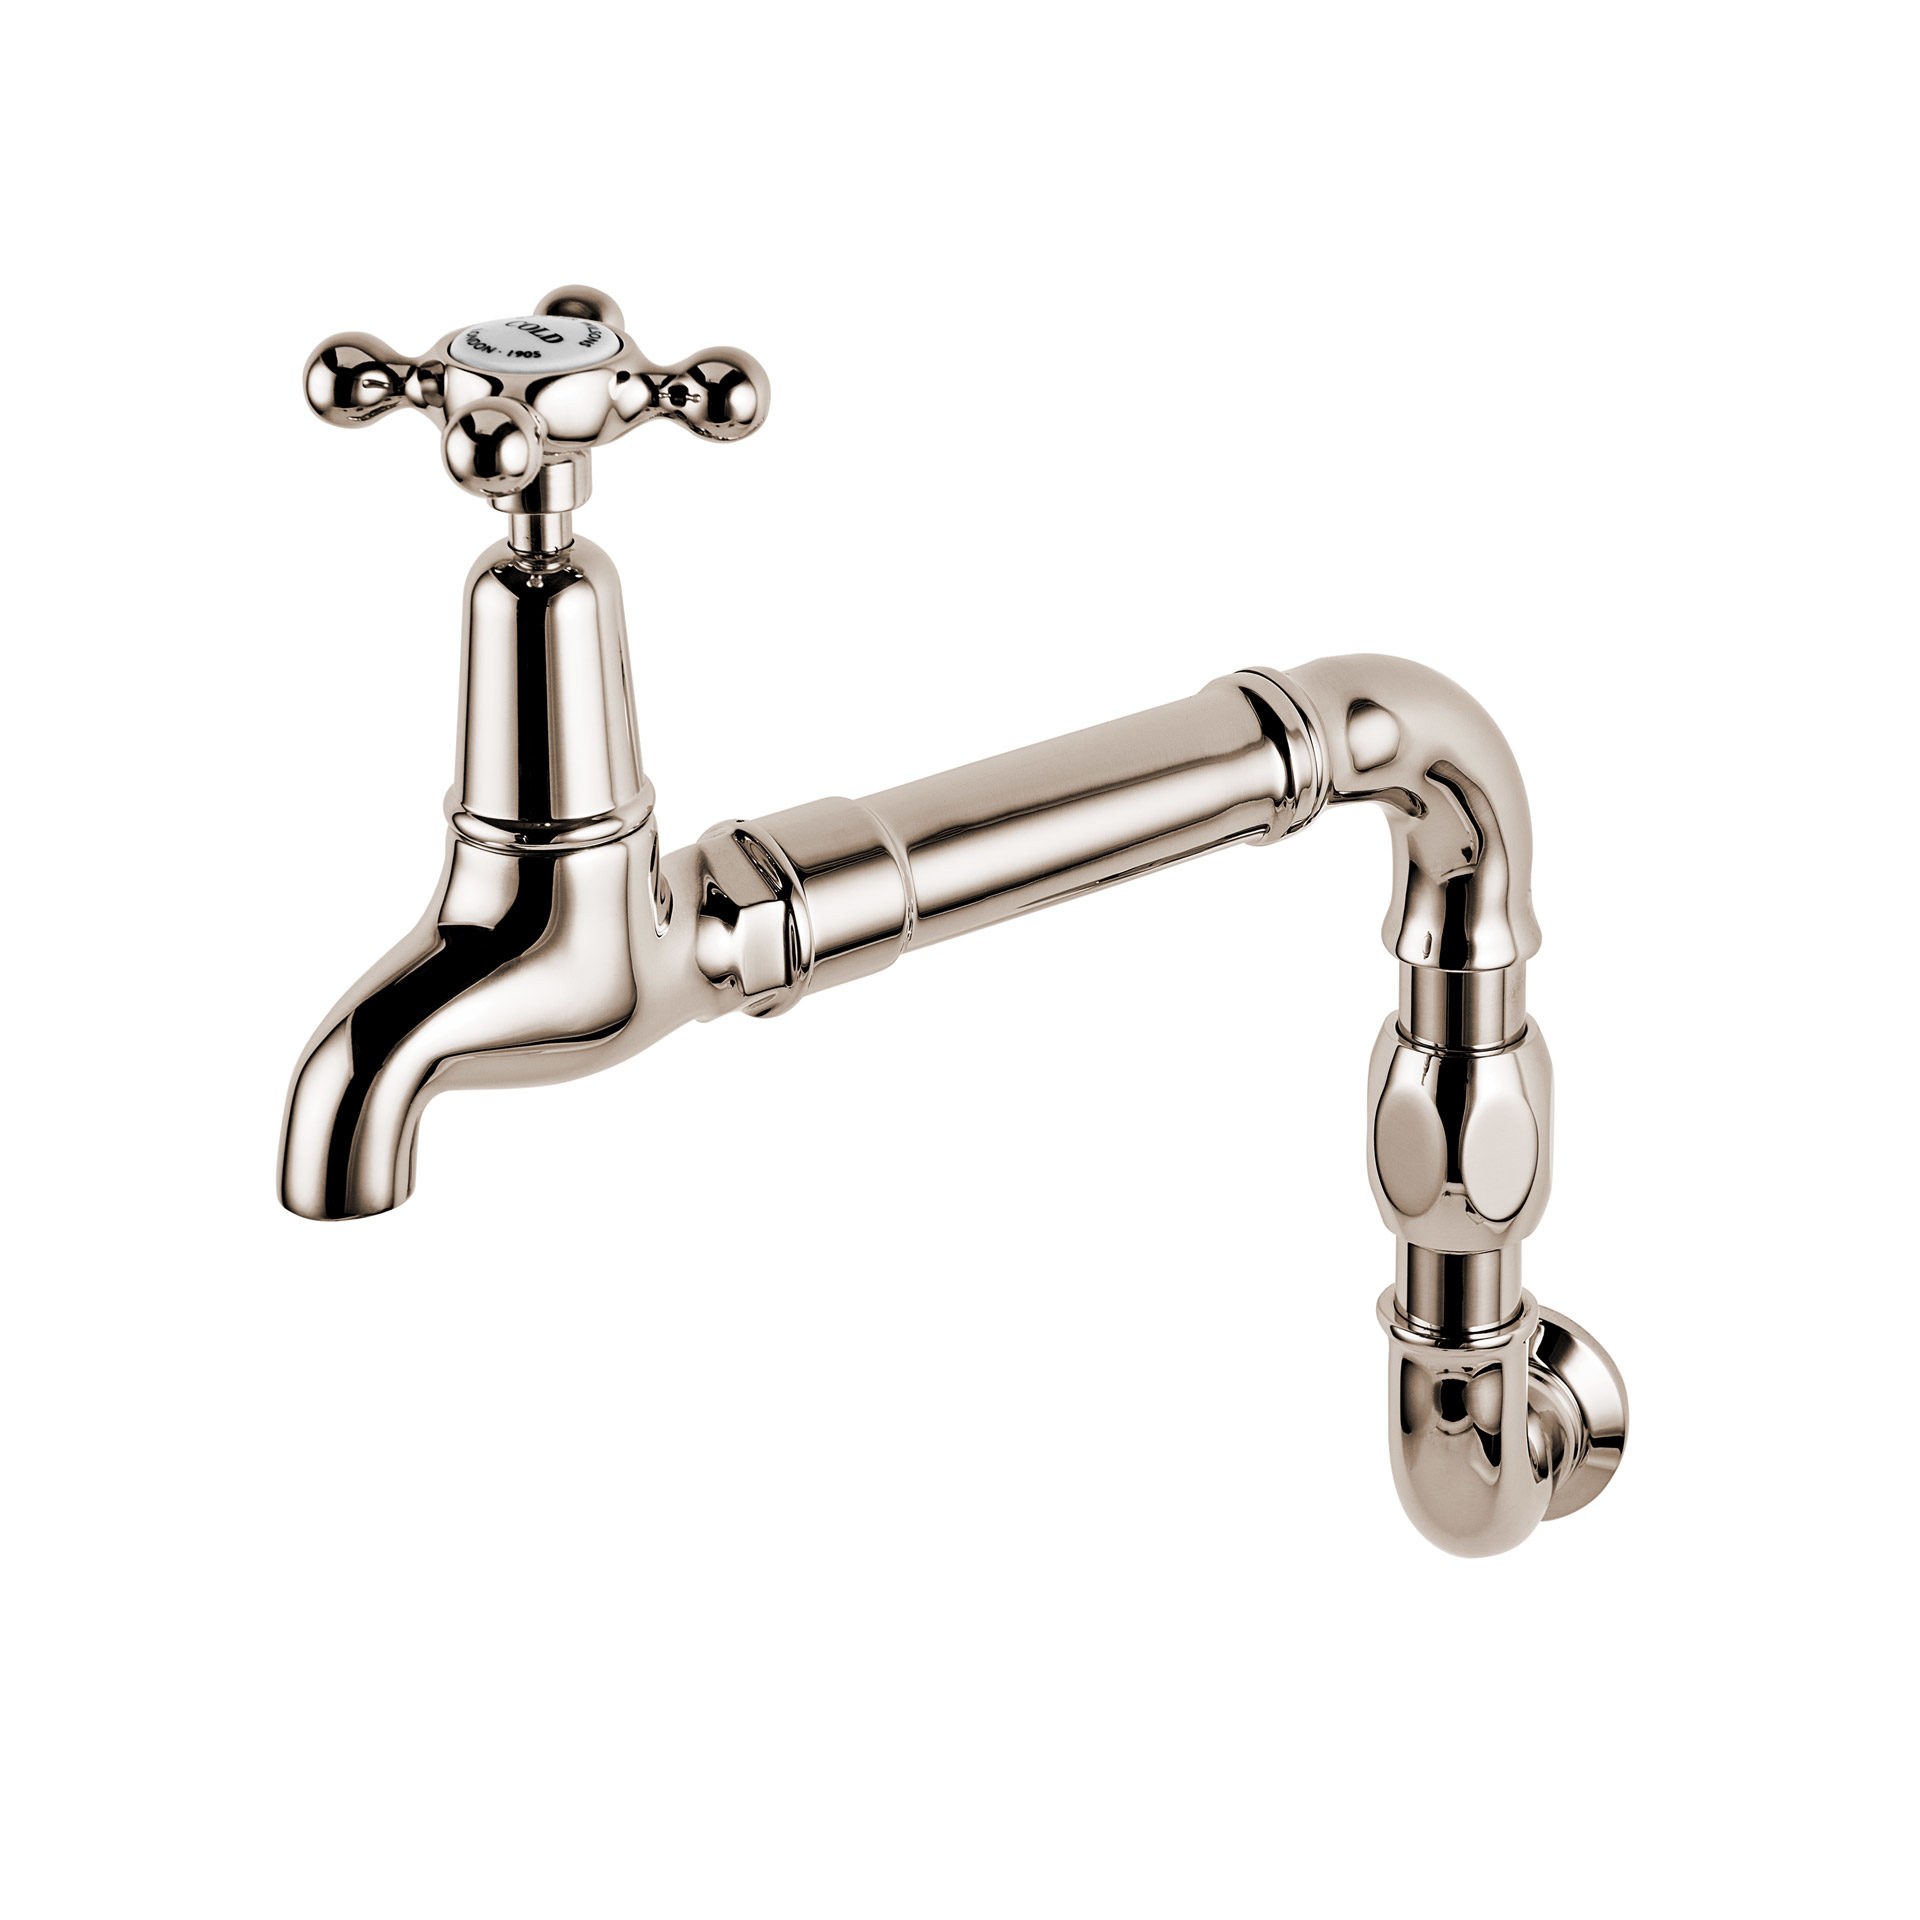 Wall mounted kitchen tap with swinging arm in polished nickel